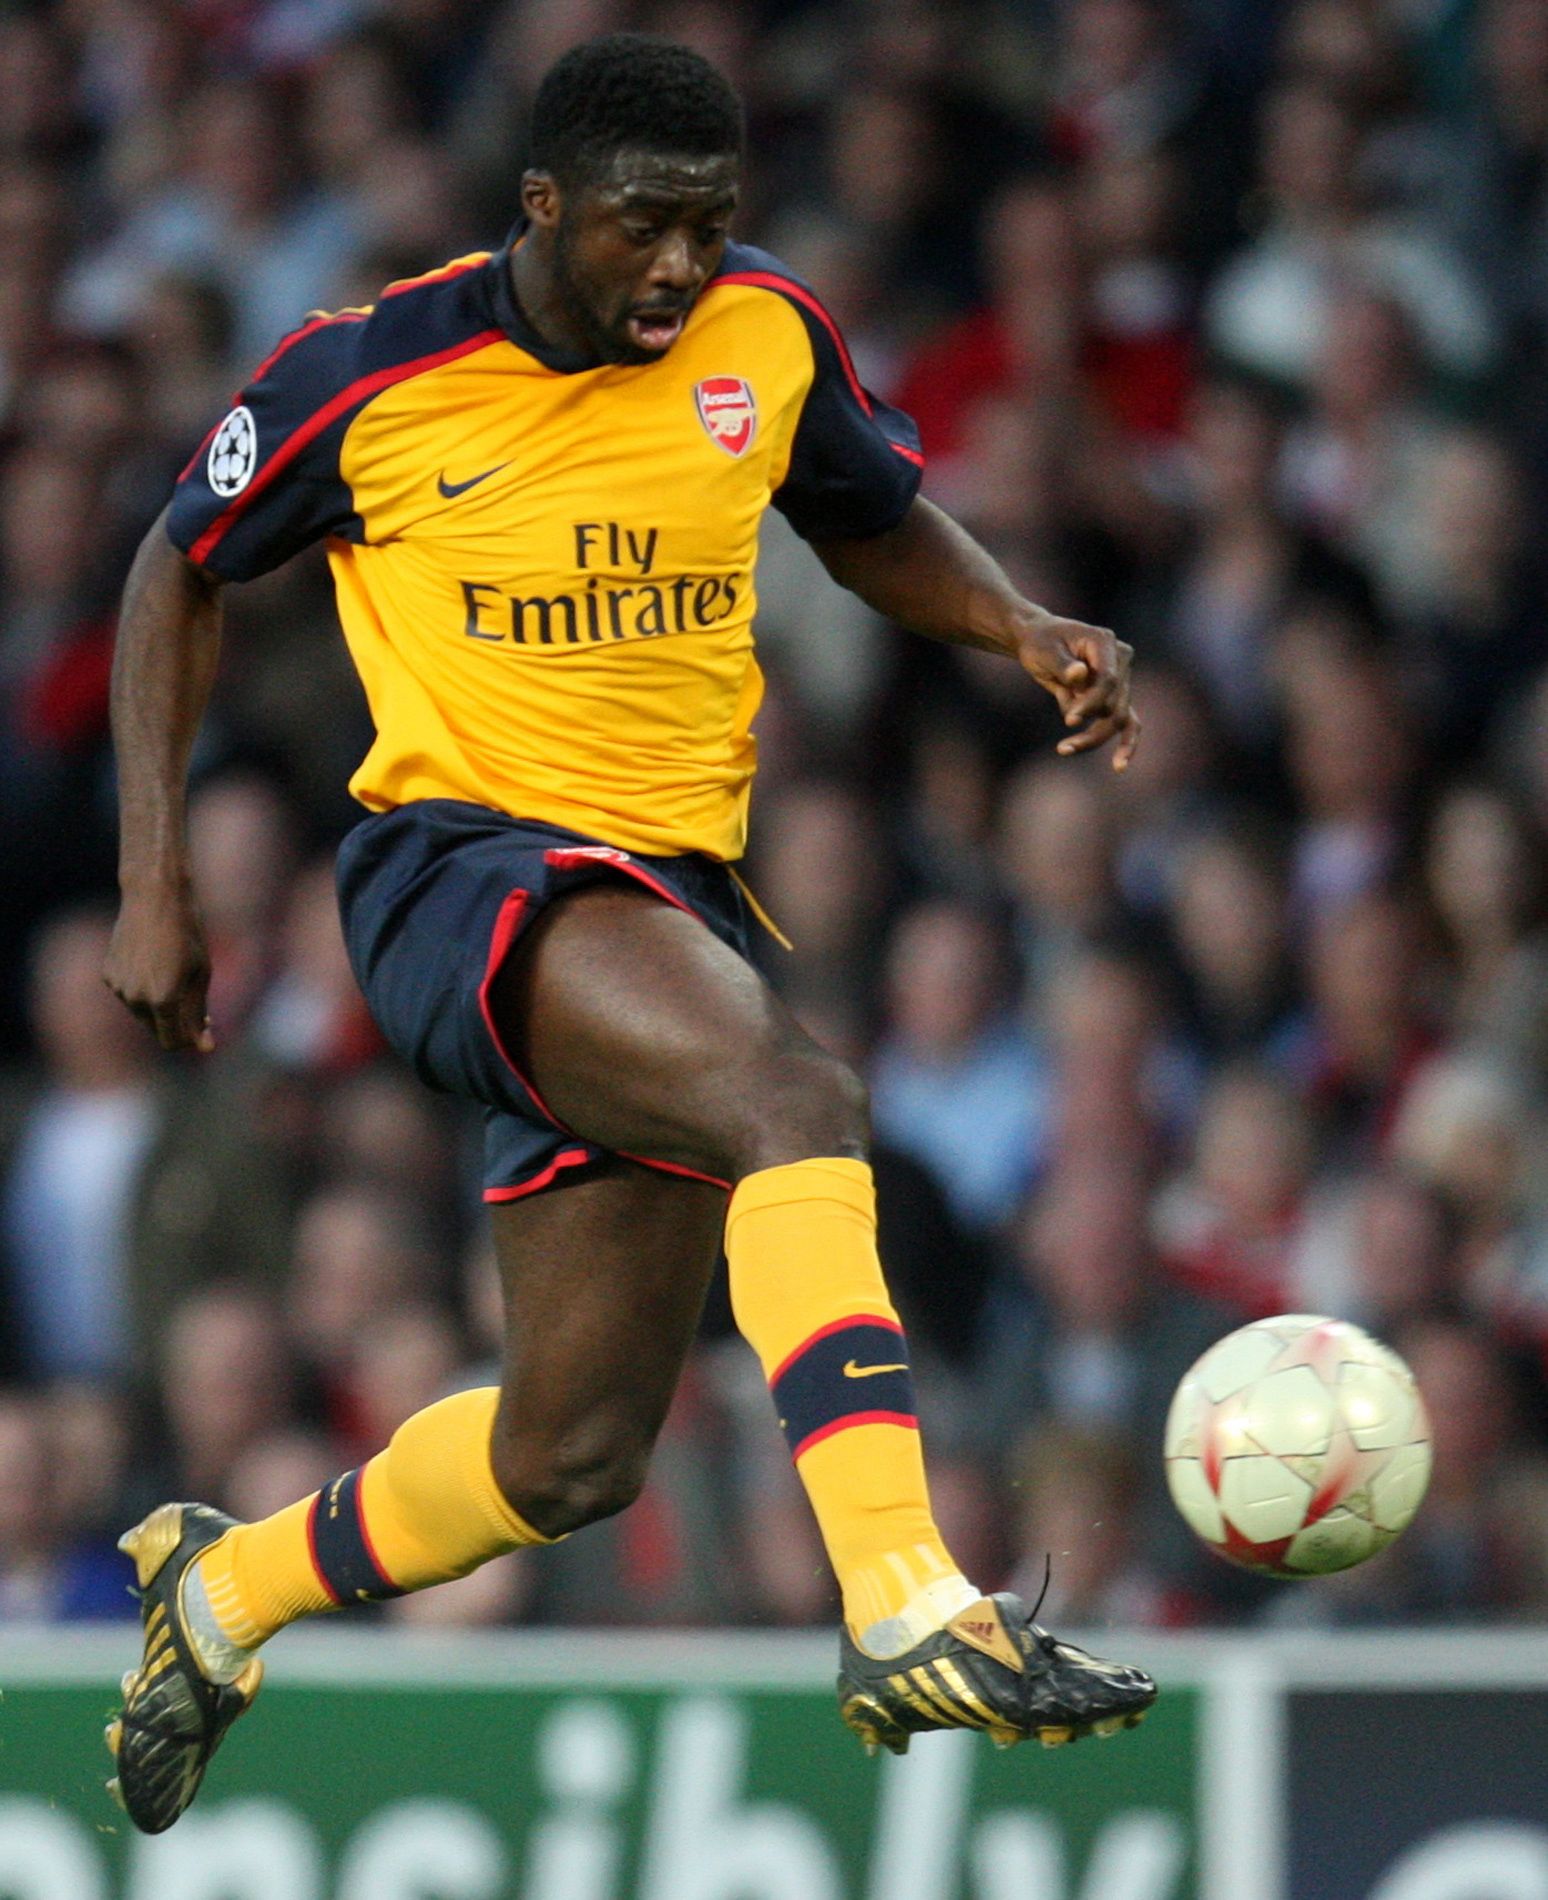 Toure playing for Arsenal.